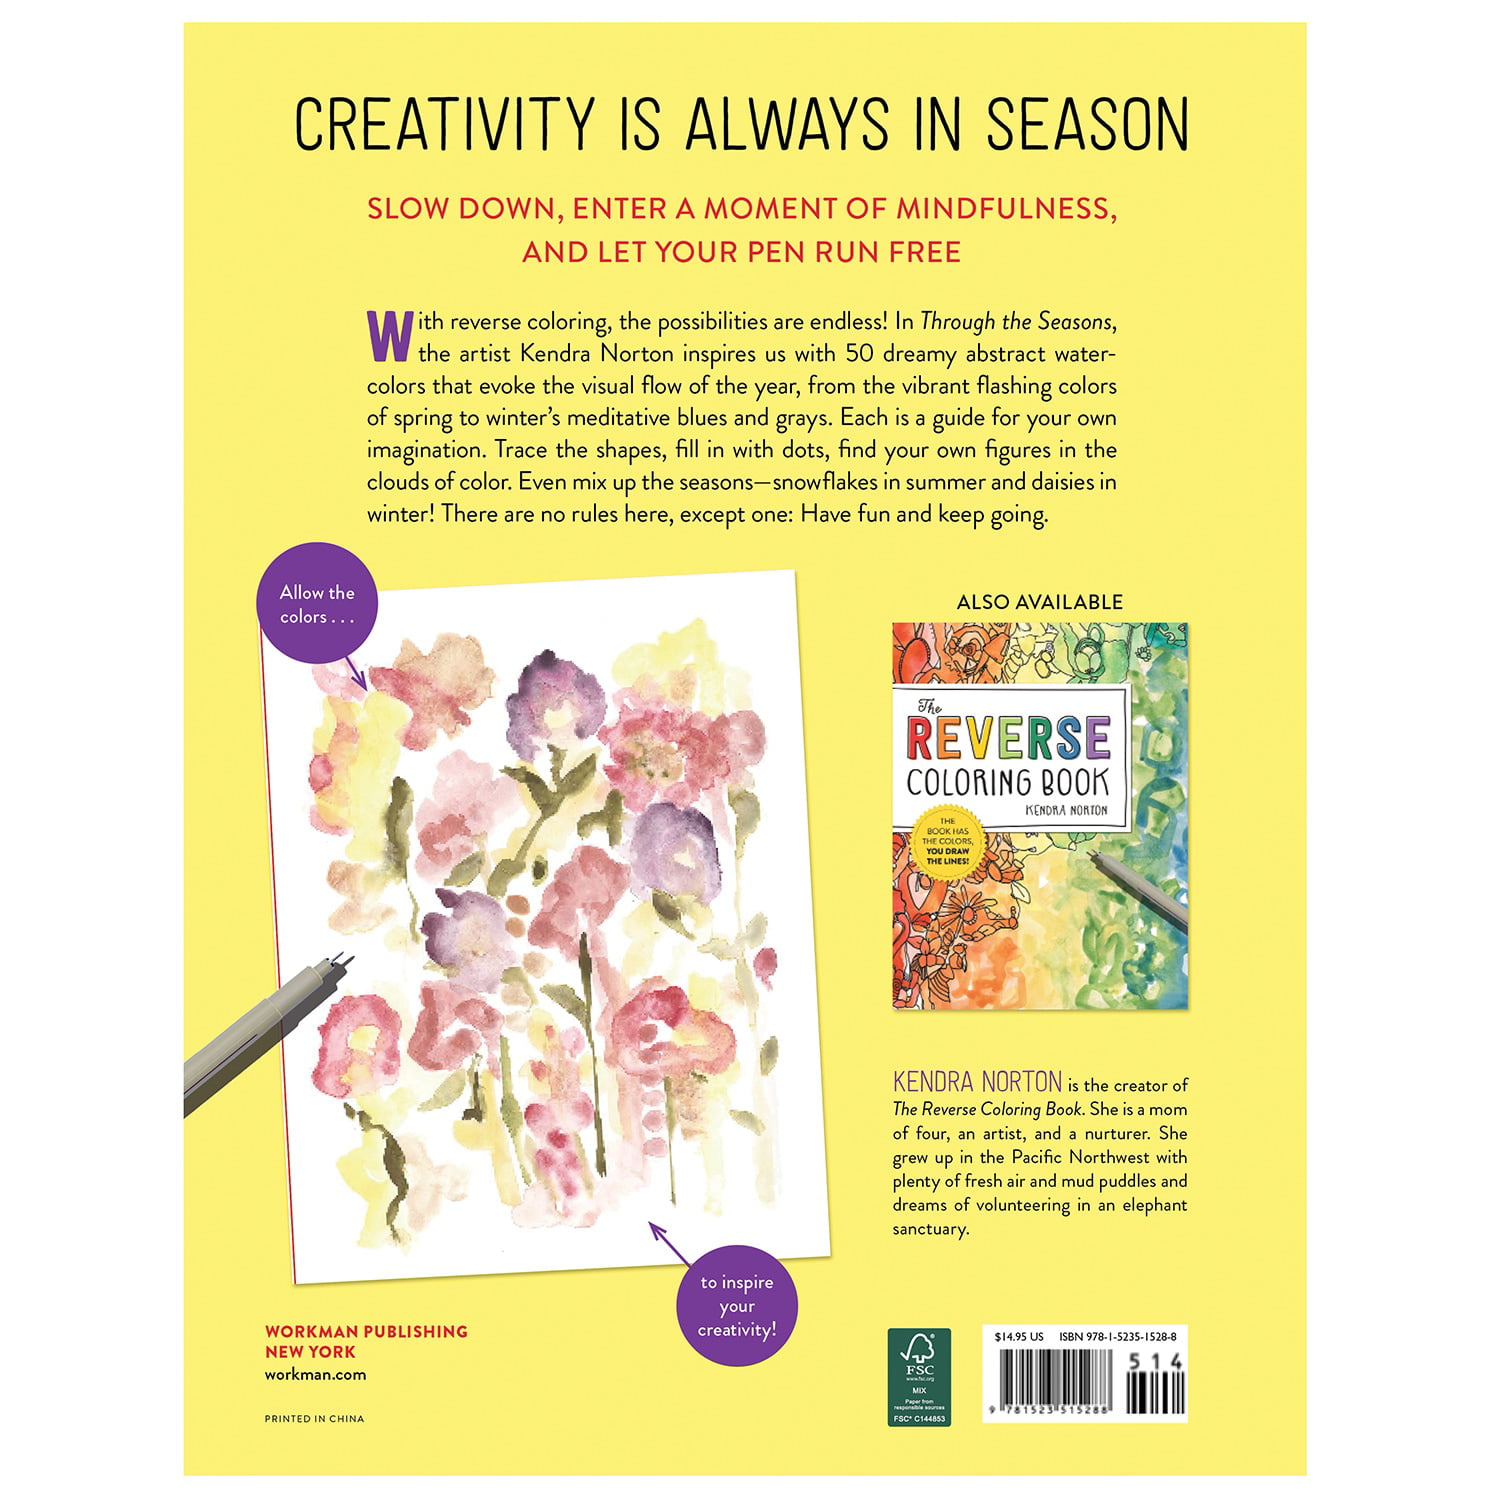 Reverse Coloring Book Ser.: The Reverse Coloring Book(tm): Mindful Journeys  : Be Calm and Creative: the Book Has the Colors, You Draw the Lines by  Kendra Norton (2022, Trade Paperback) for sale